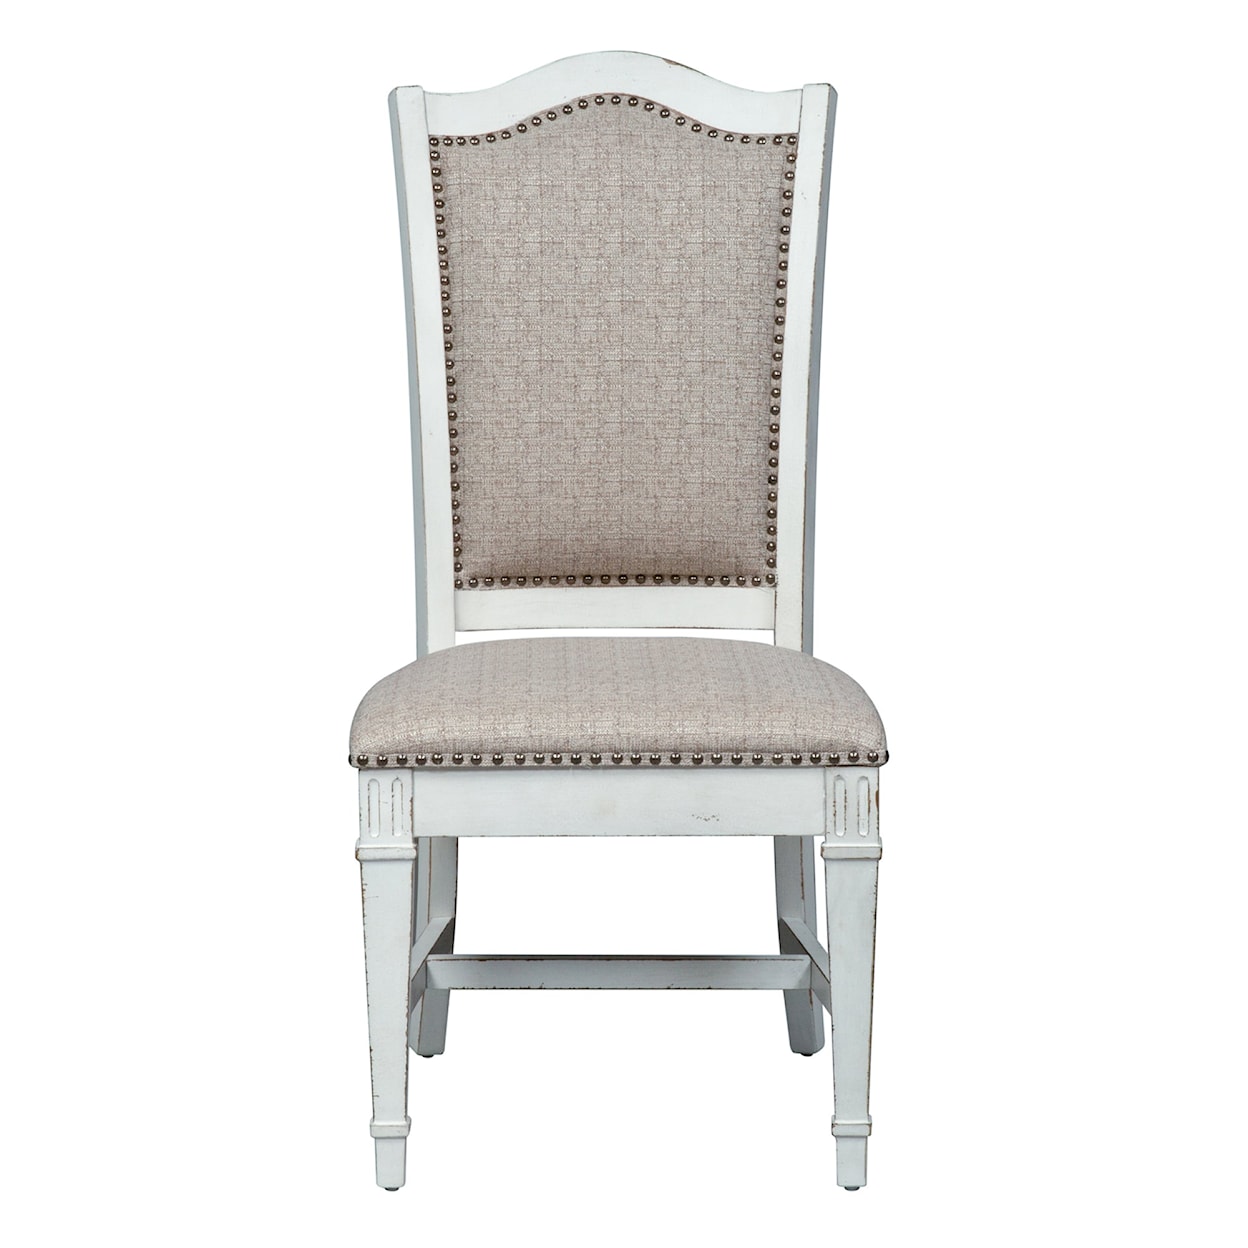 Libby Abbey Park Upholstered Side Chair